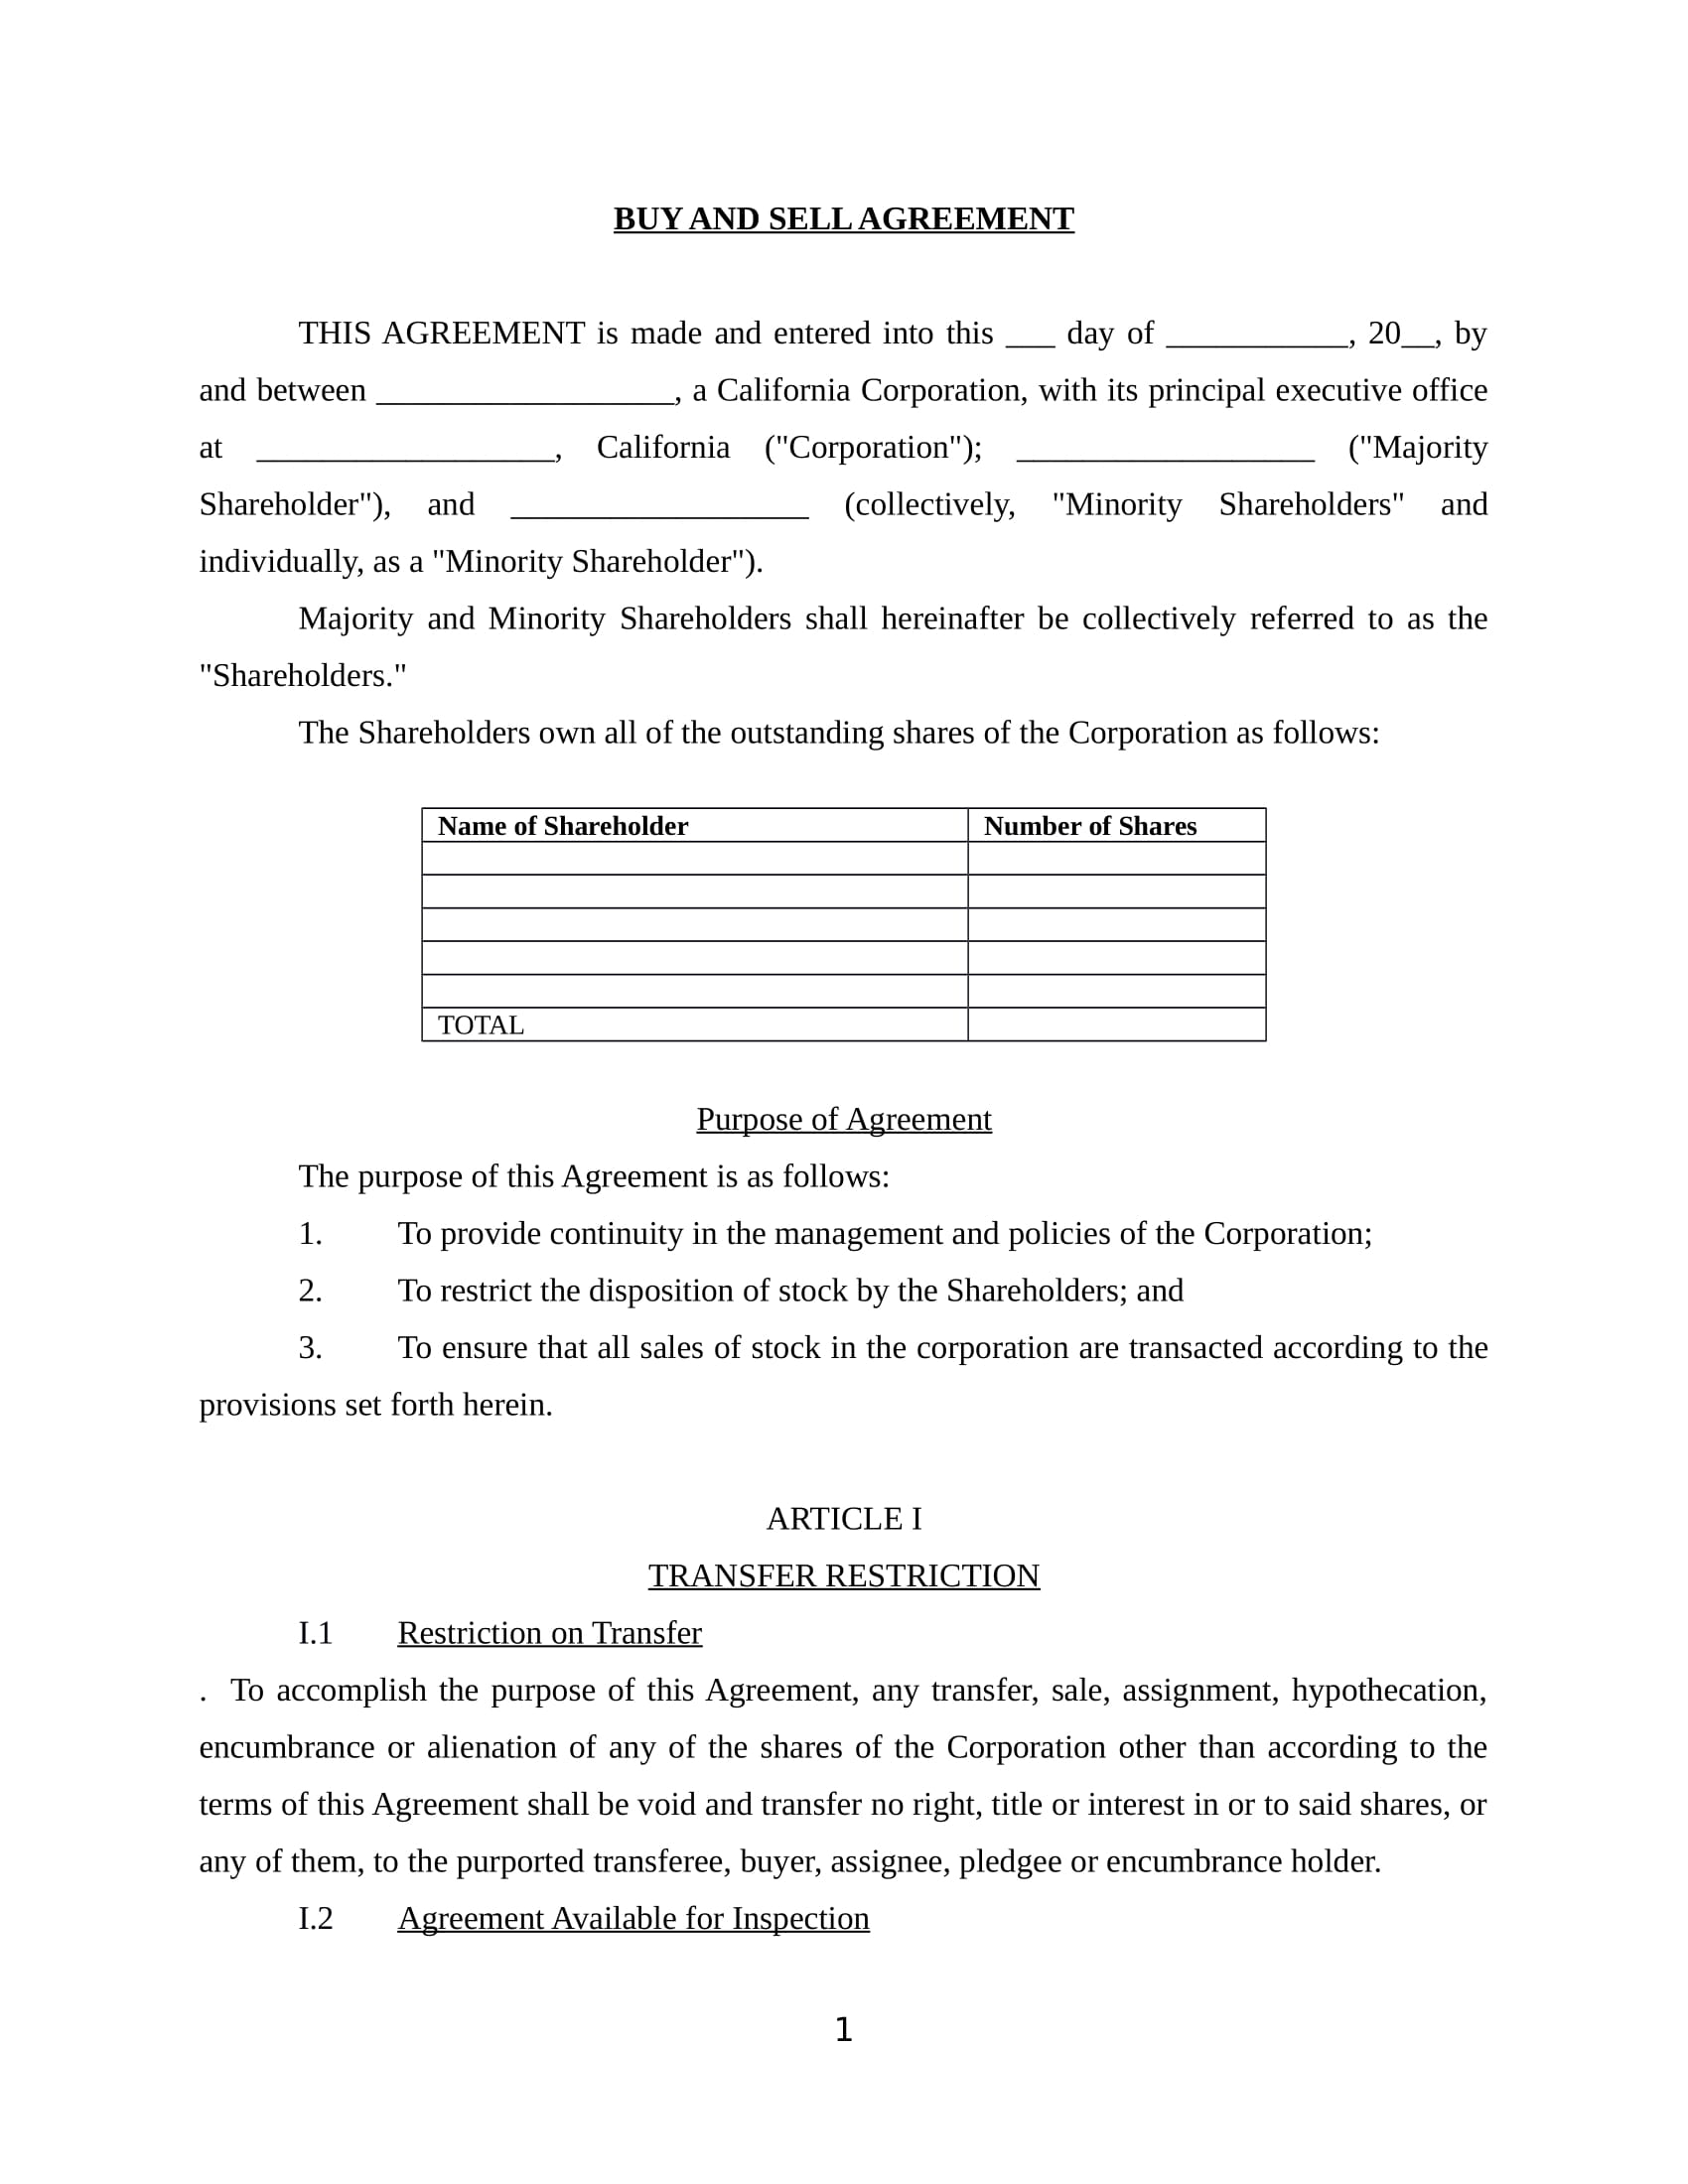 buy and sell agreement contract form in doc 04